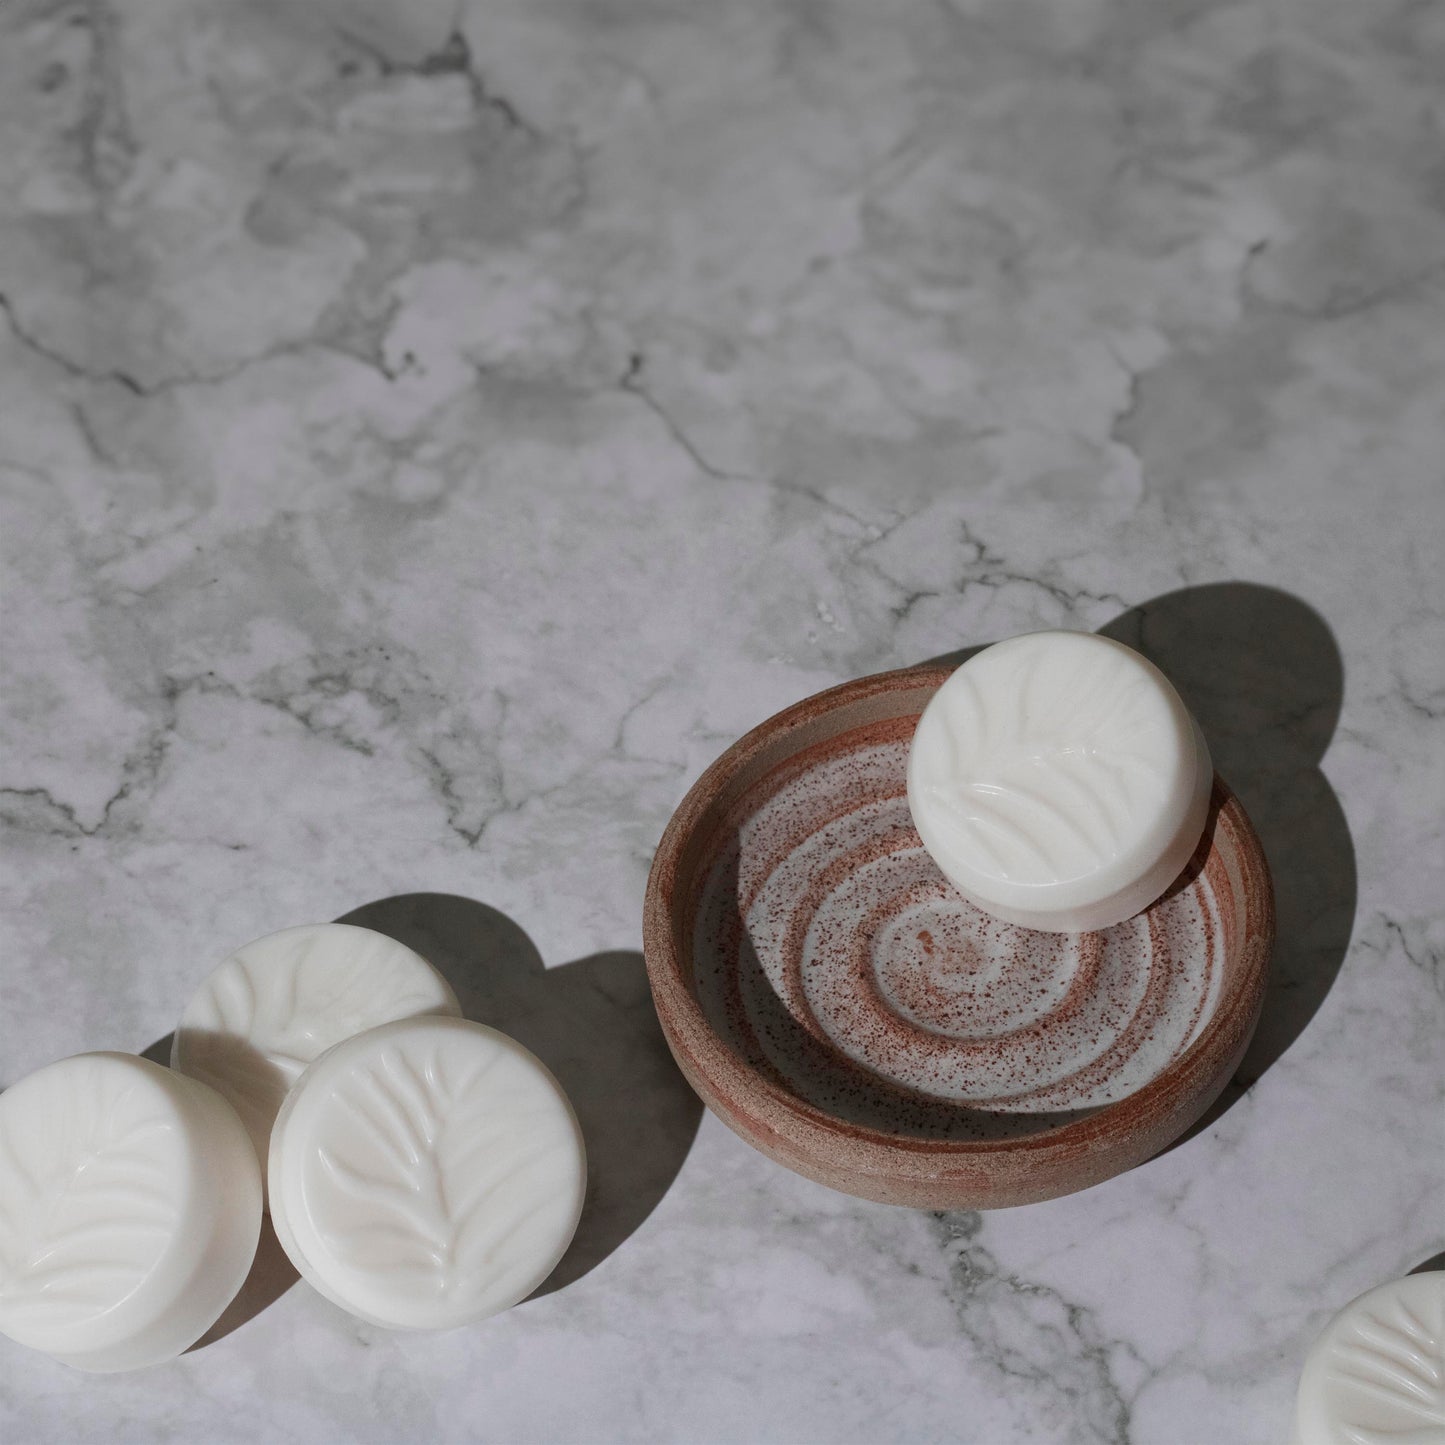 Adriatic Fig & Cassis Wax Melts